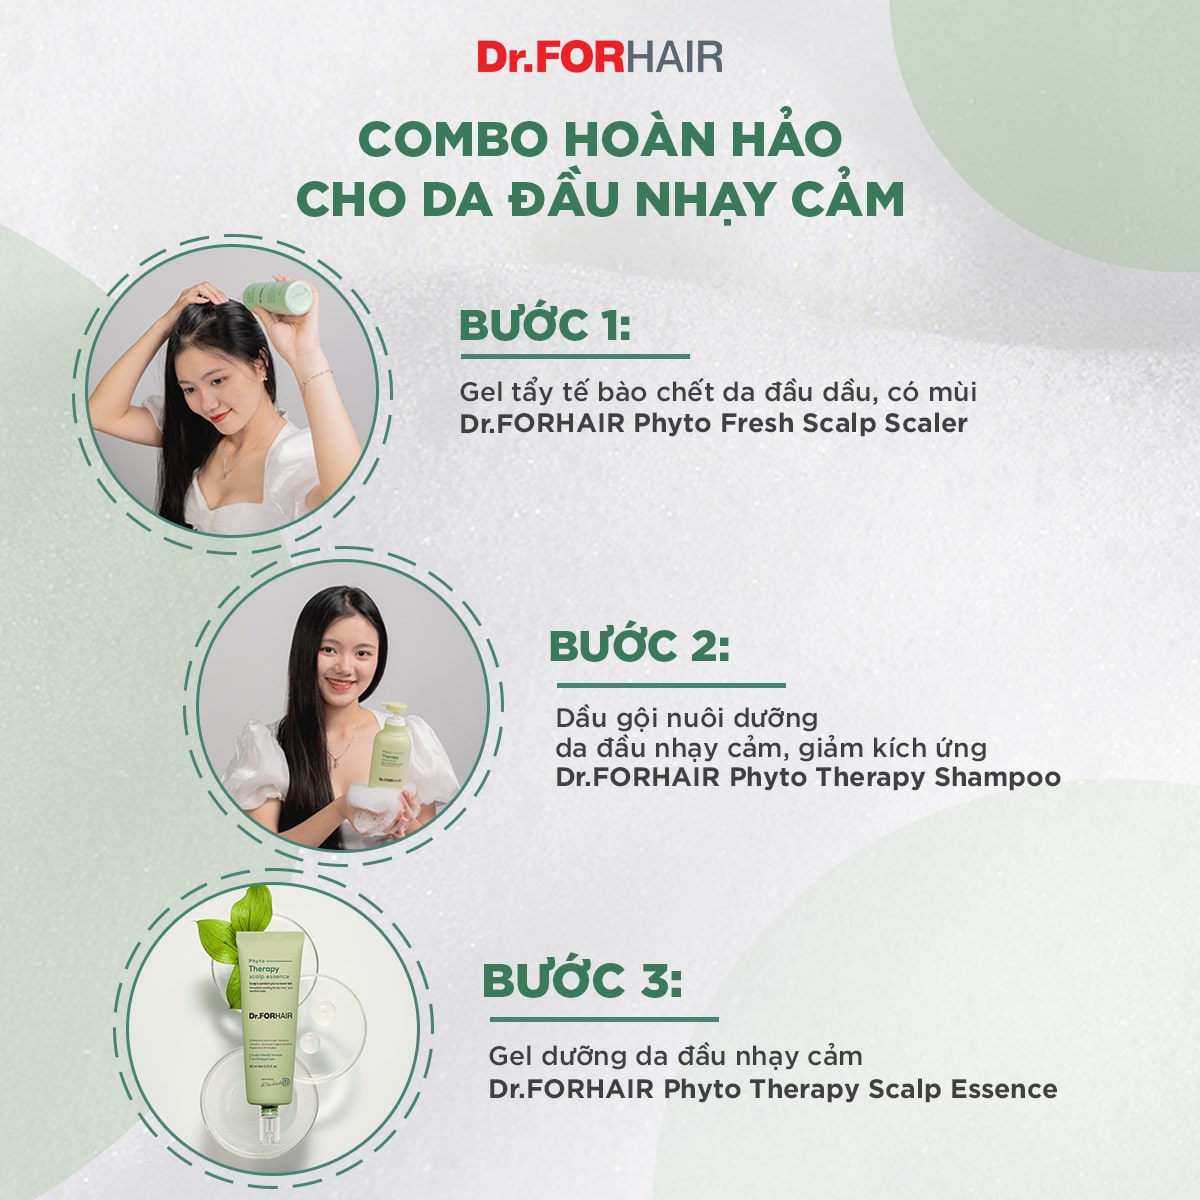 phyto therapy shampoo + phyto therapy treatment + phyto fresh scalp scaler